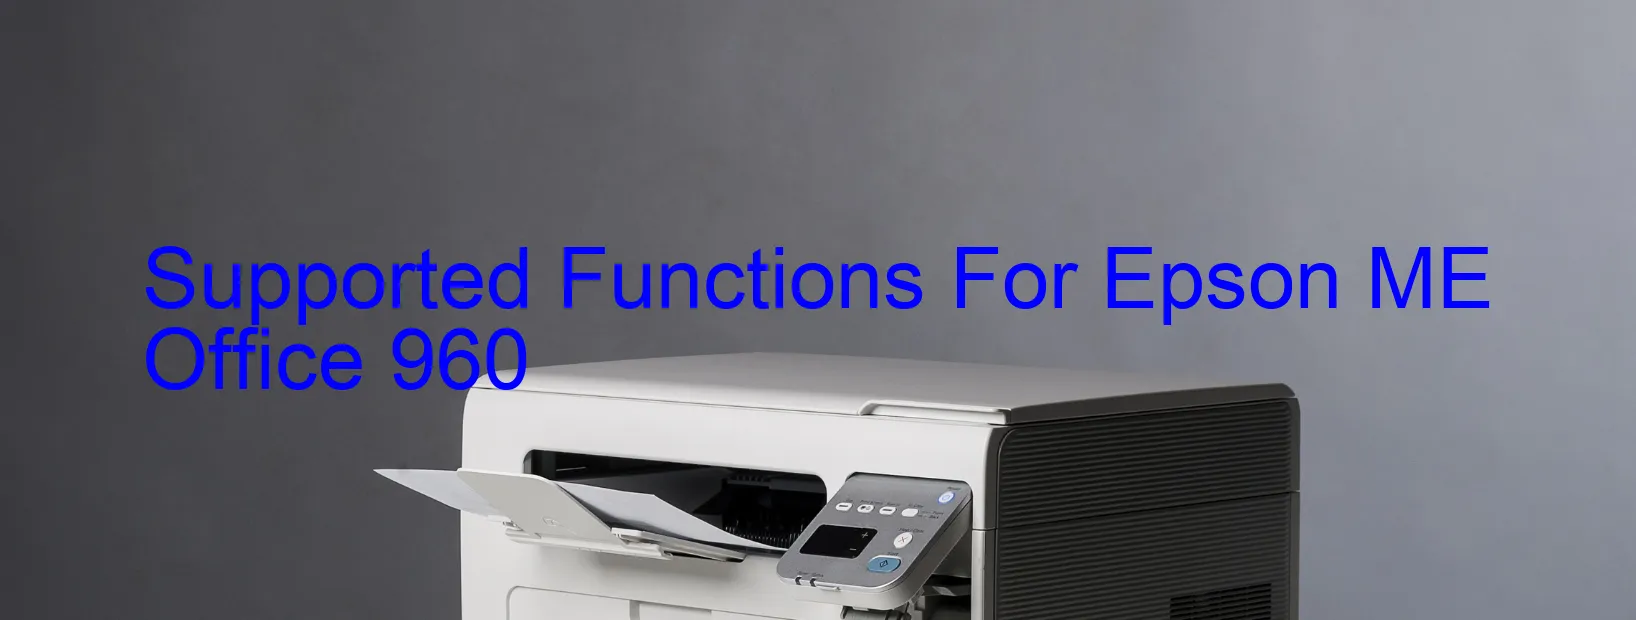 supported-functions-for-epson-me-office-960.webp